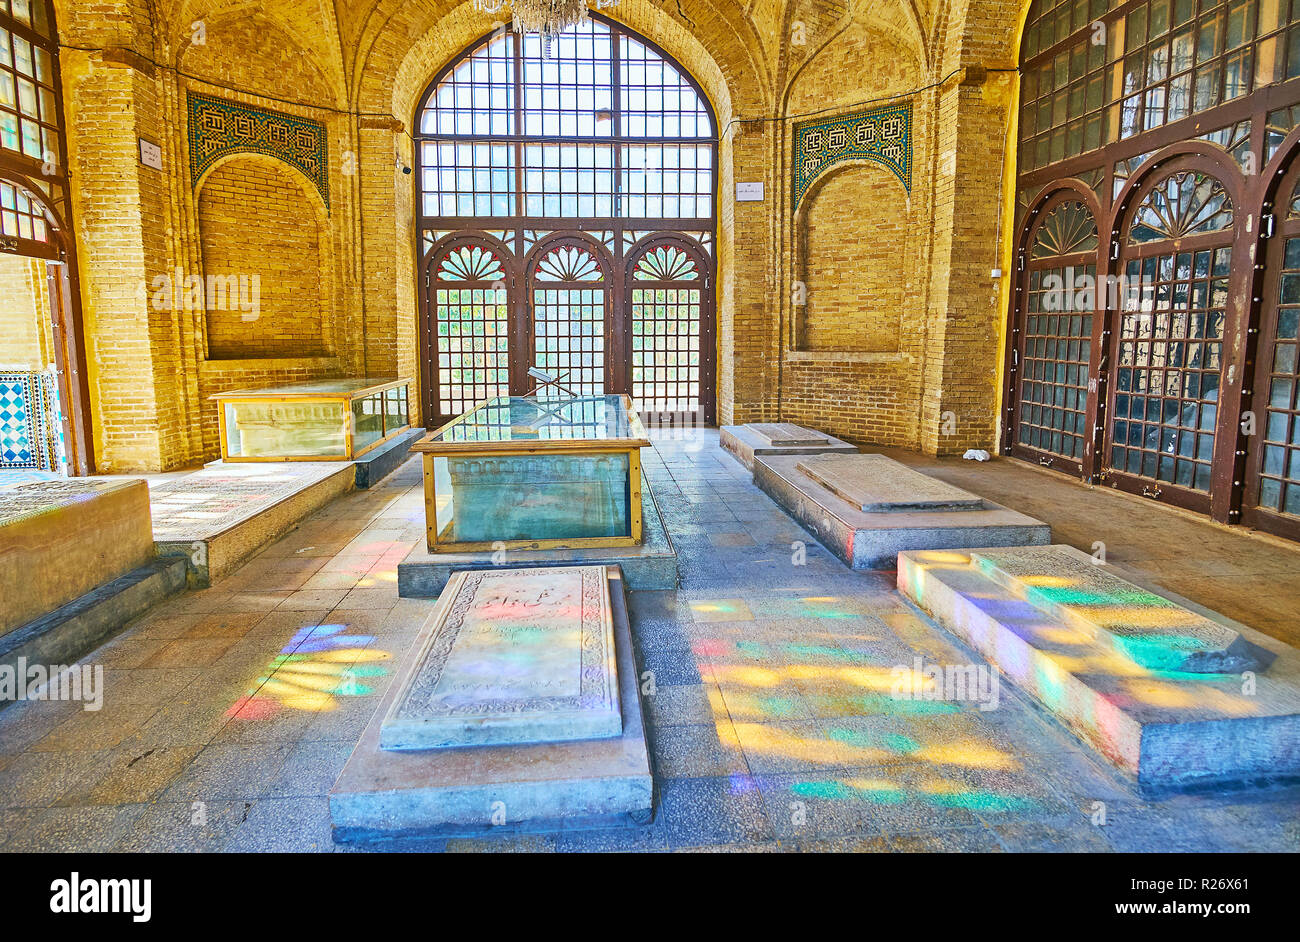 SHIRAZ, IRAN - OCTOBER 13, 2017: Interior of Hafezieh - memorial hall with stone tombs, located on territory of Hafez Tomb, on October 13 in Shiraz. Stock Photo